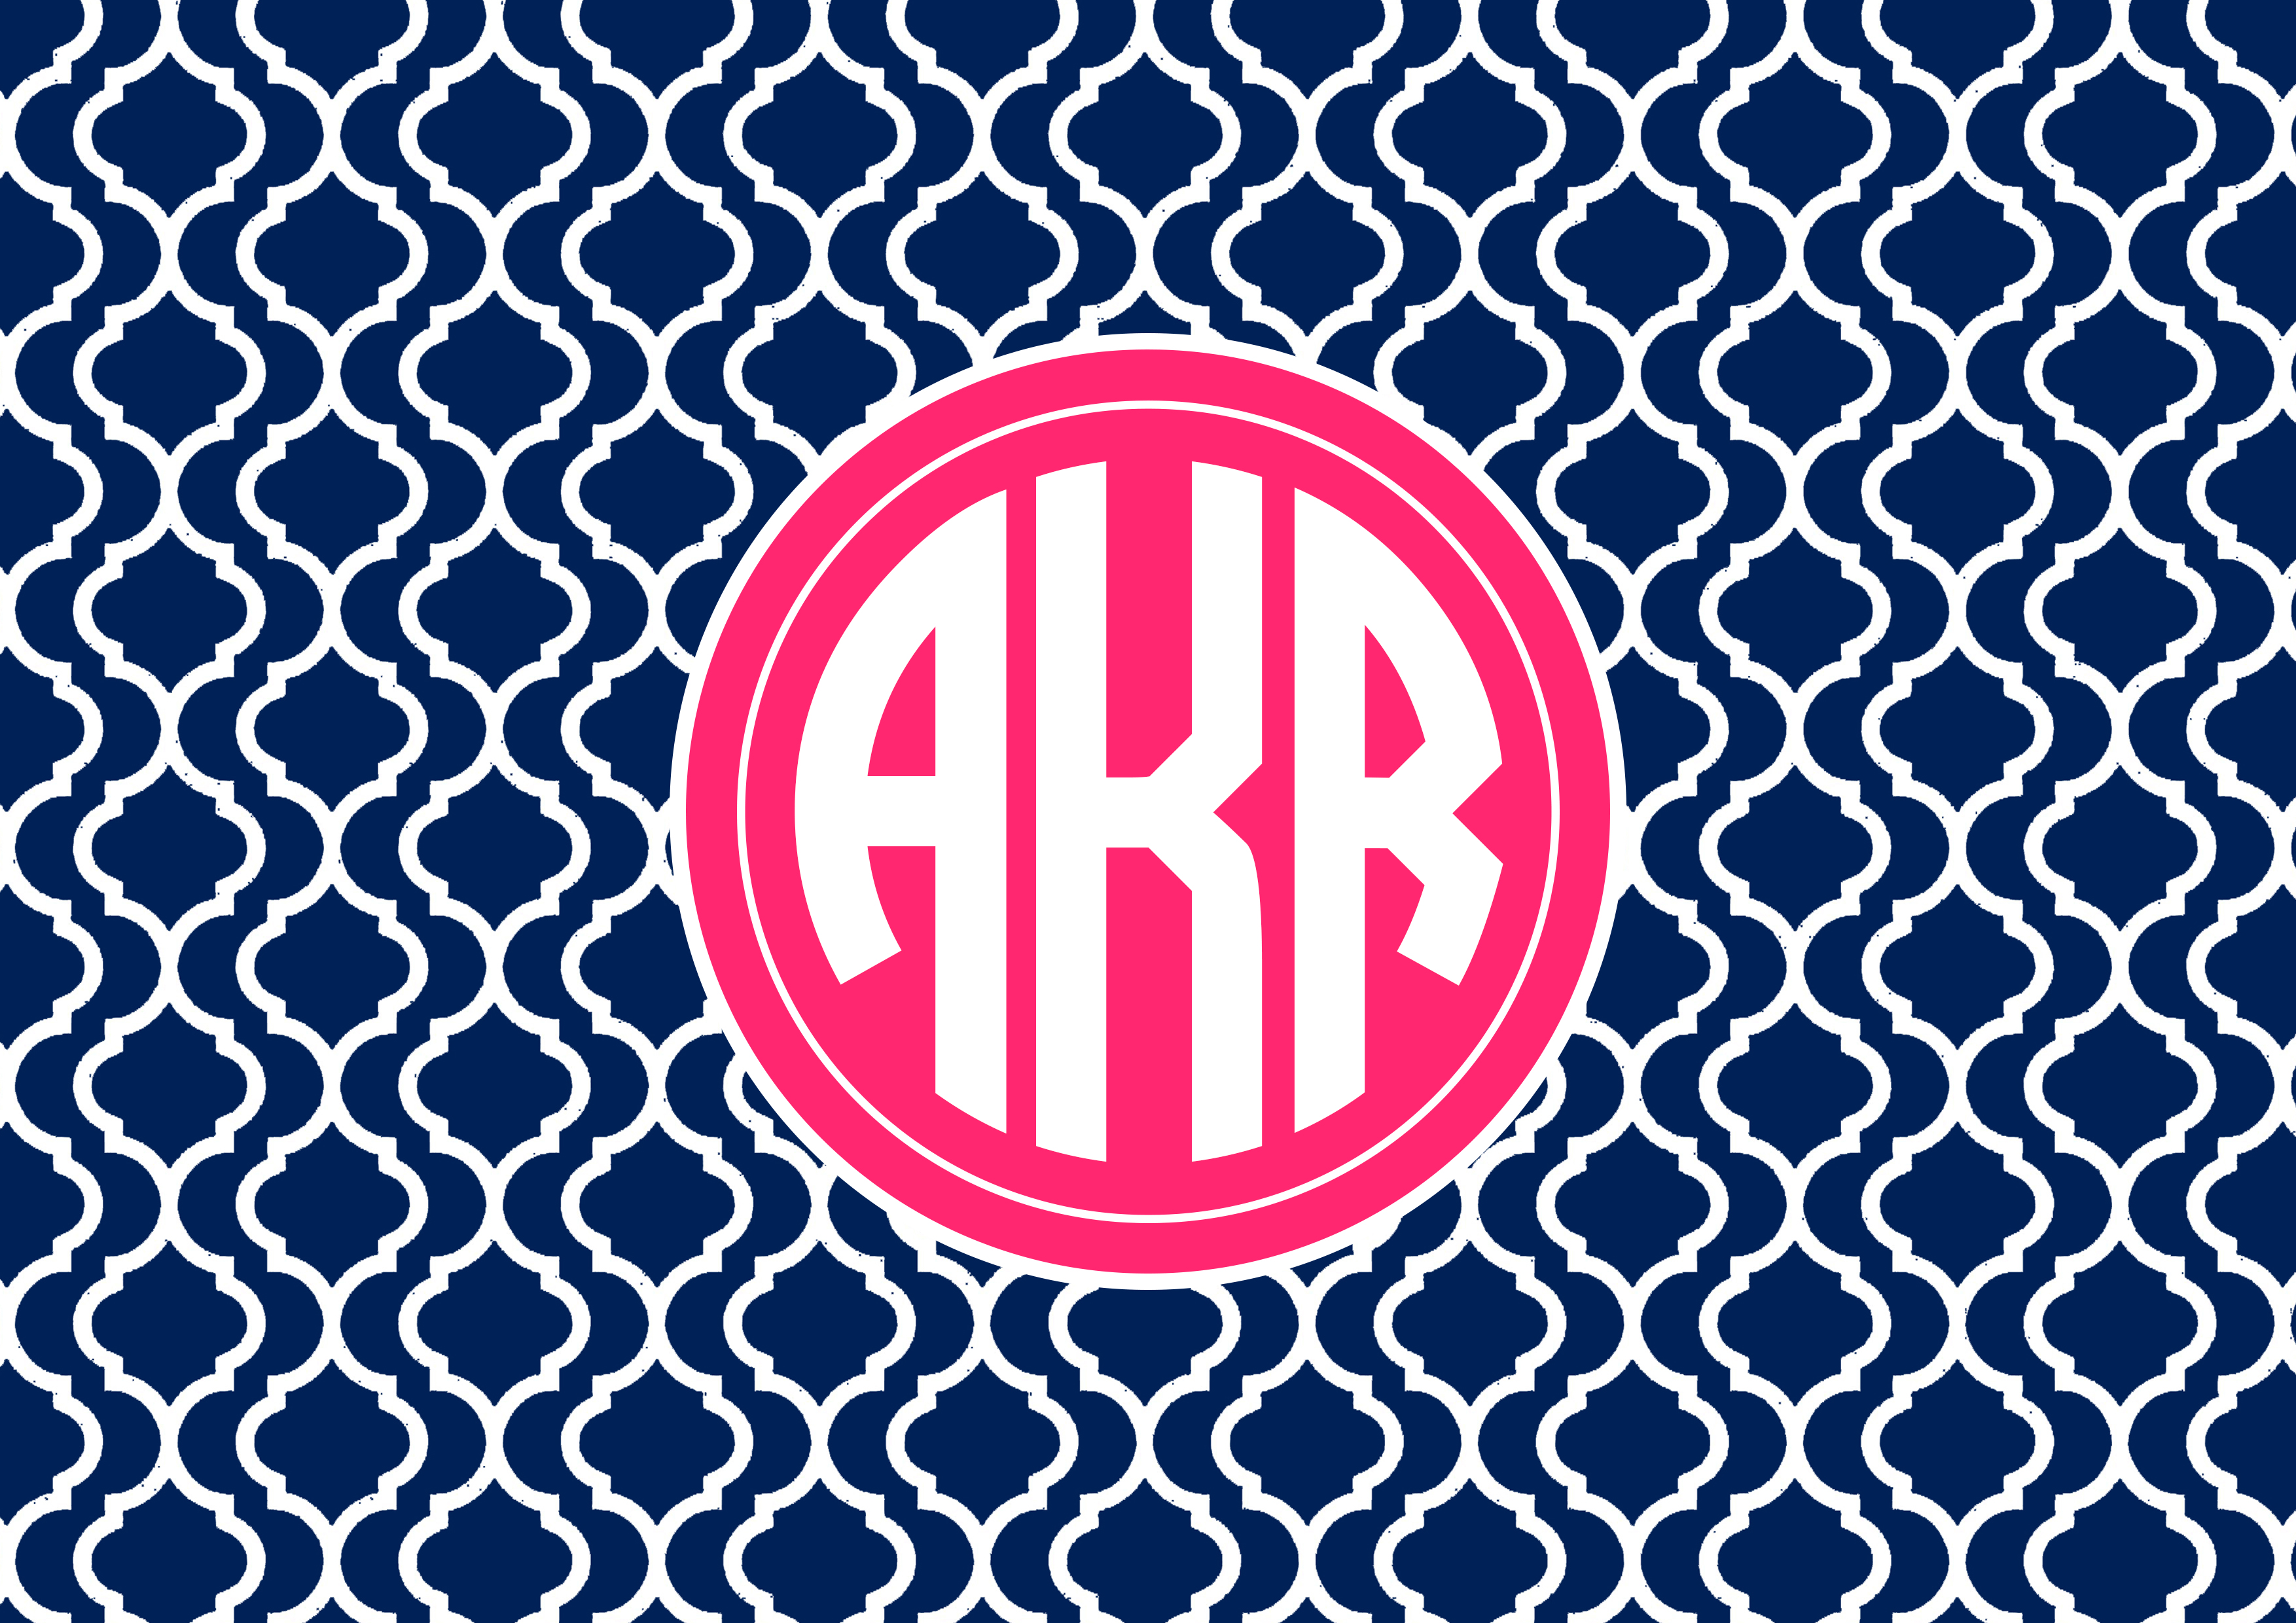 Personalised Monogram Wallpaper Allaboutthehouse Printables HD Wallpapers Download Free Map Images Wallpaper [wallpaper376.blogspot.com]